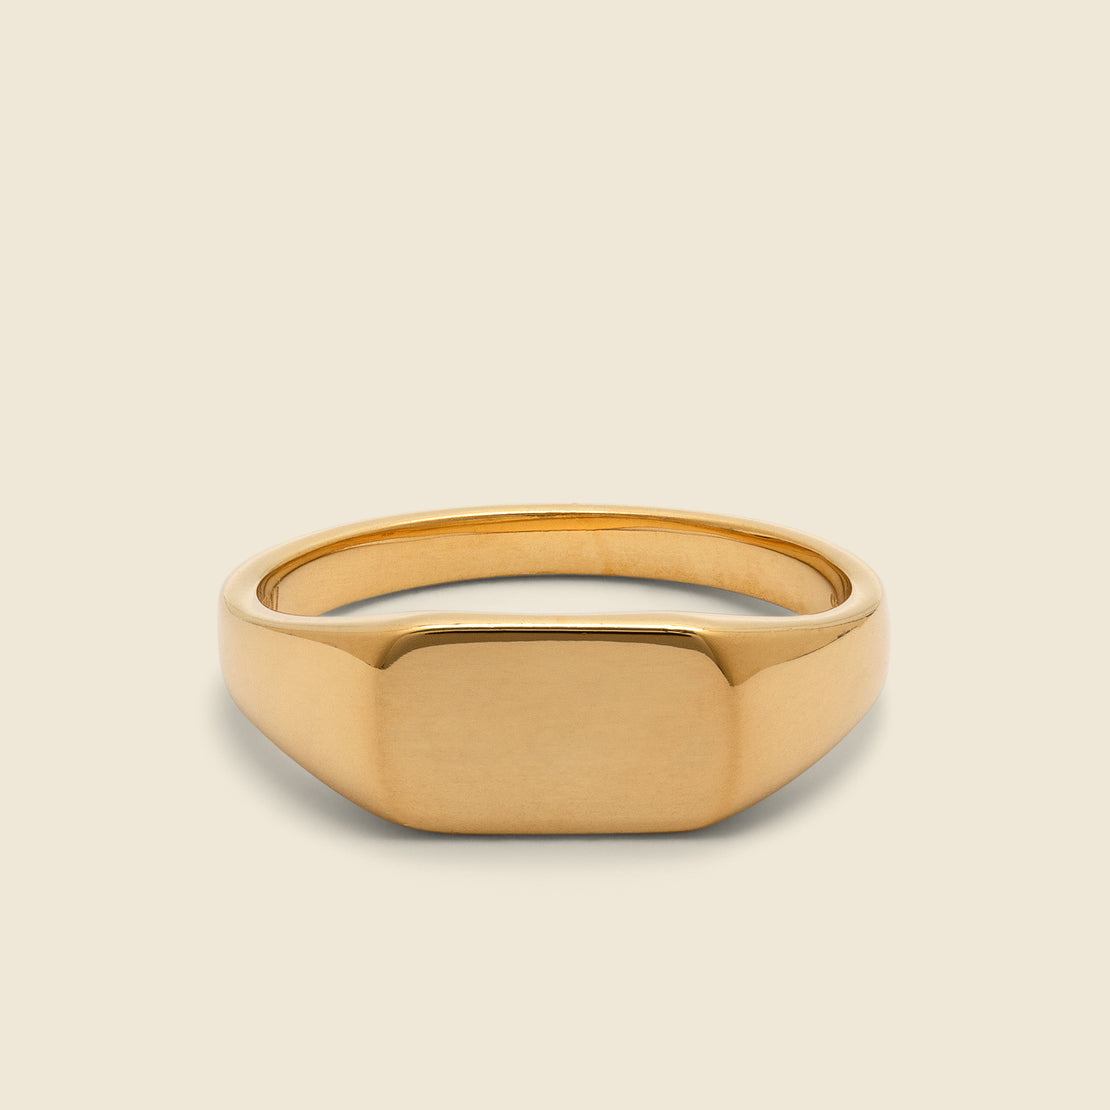 Arden Ring - Gold Vermeil - Miansai - STAG Provisions - Accessories - Rings